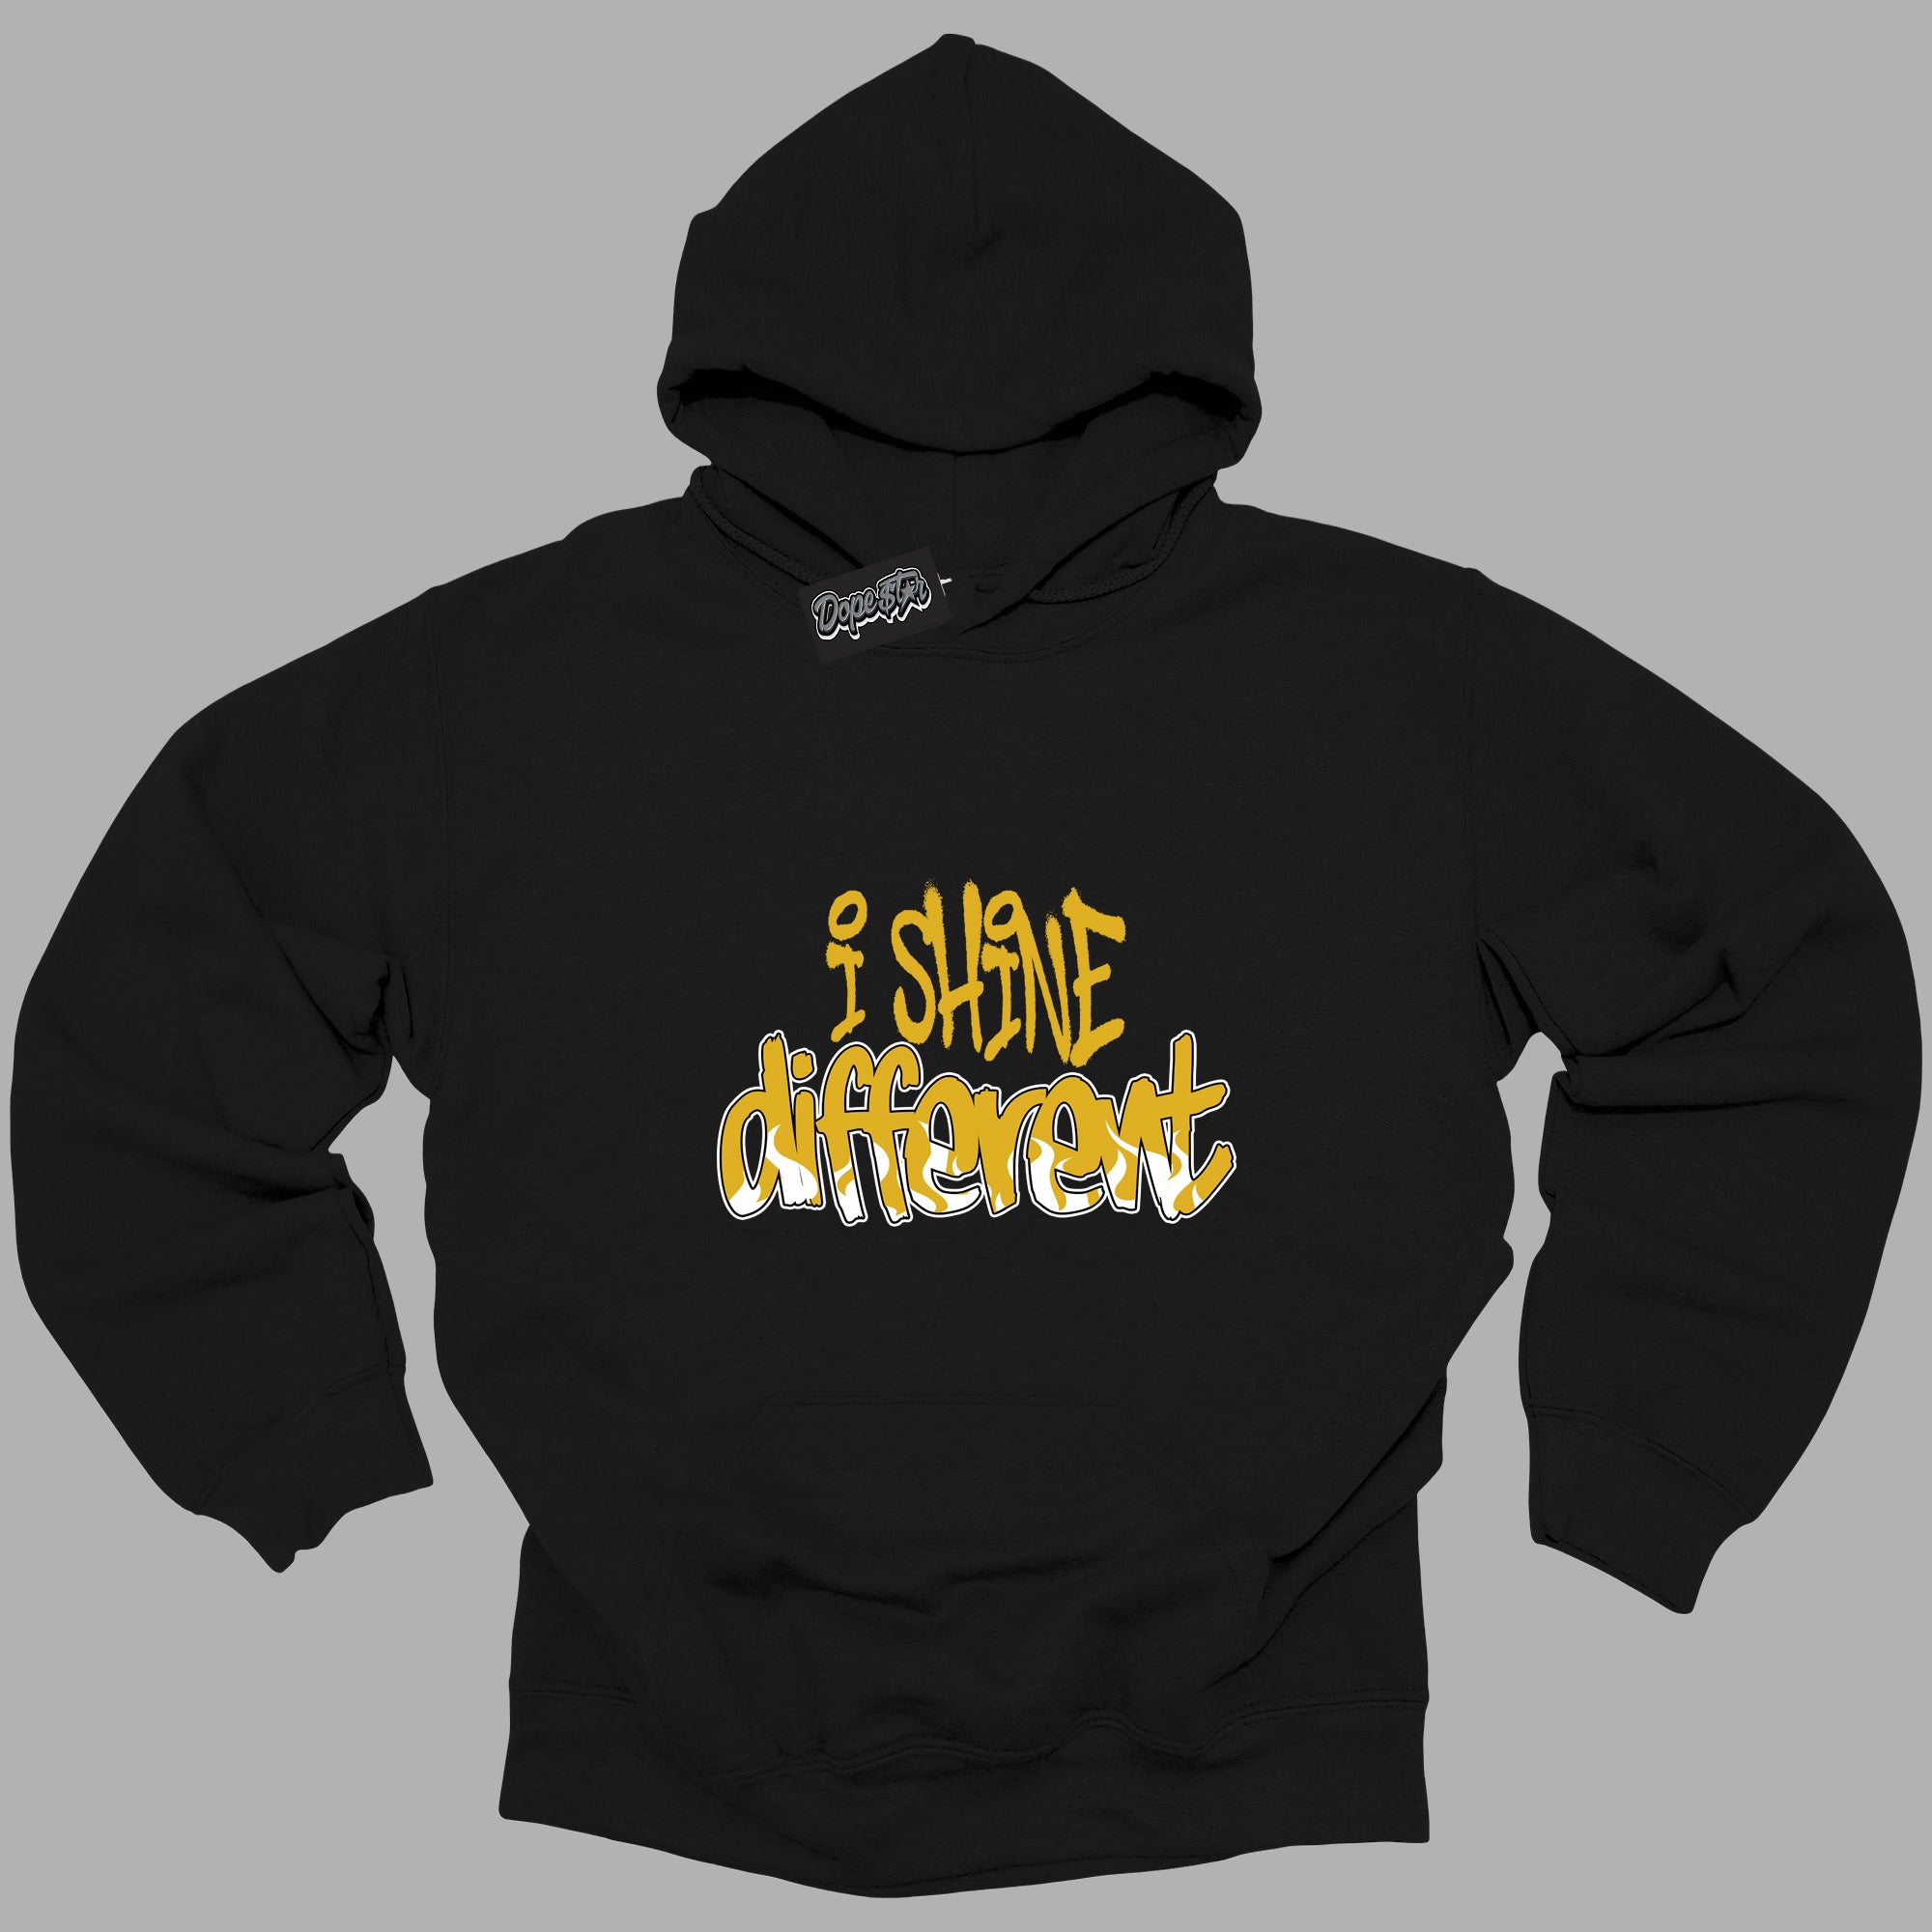 Cool Black Hoodie with “ I Shine Different ”  design that Perfectly Matches Yellow Ochre 6s Sneakers.